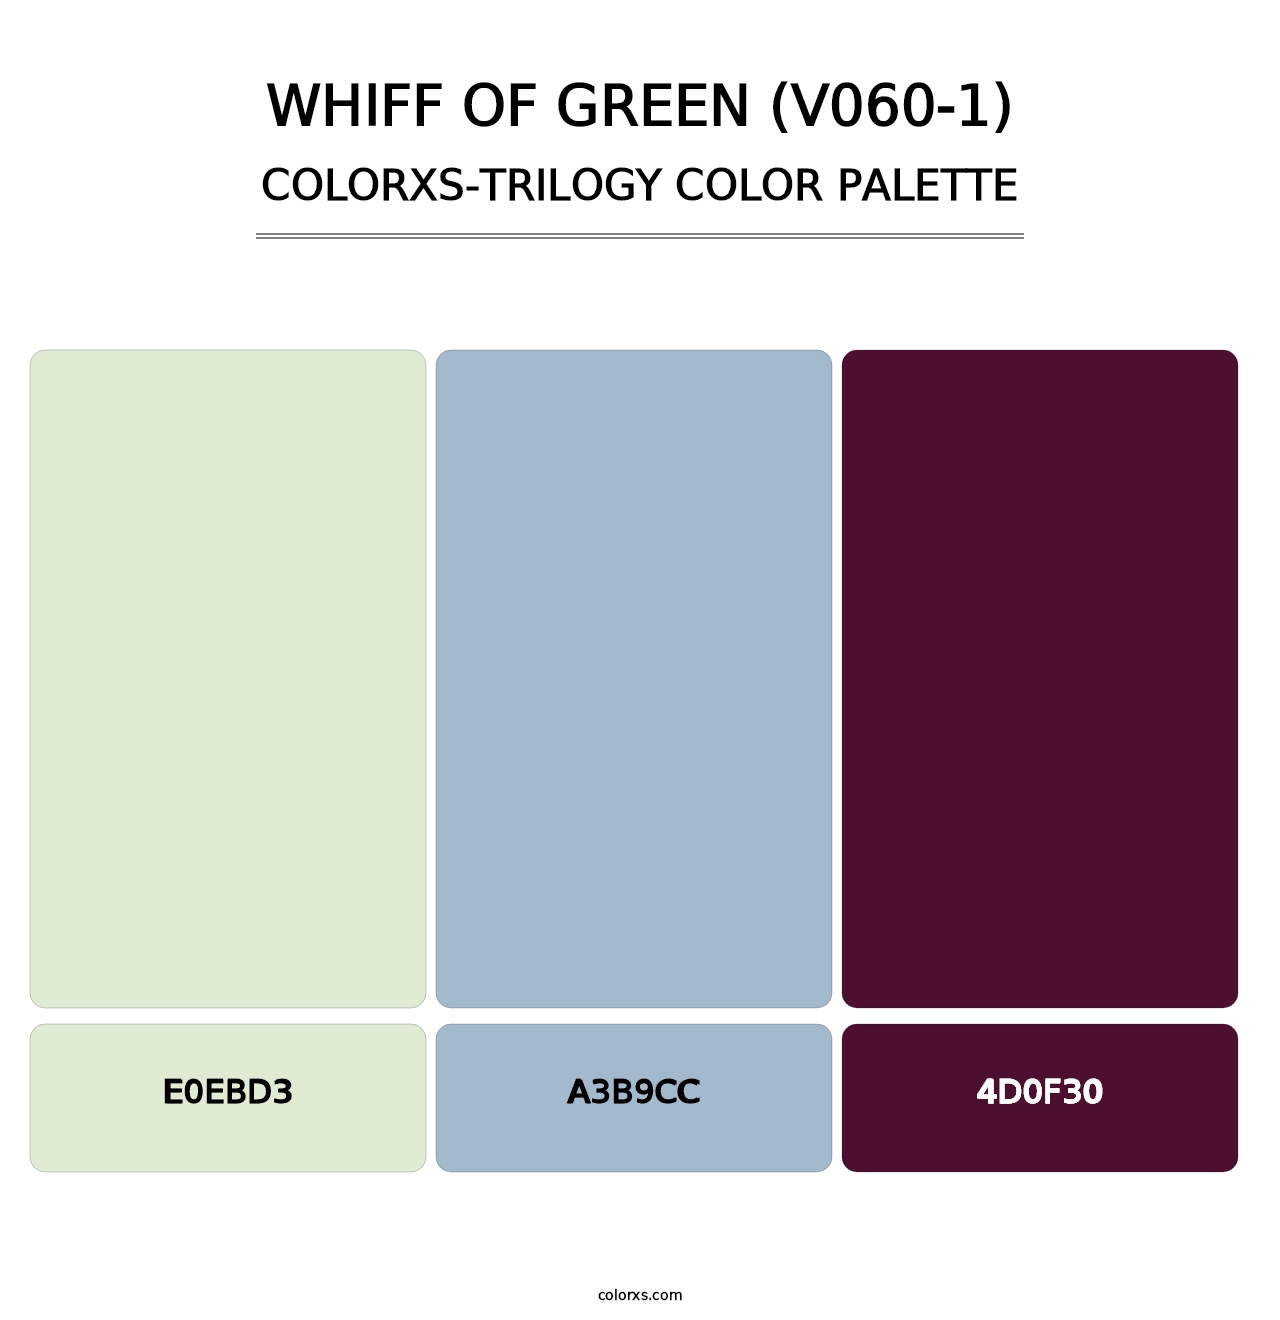 Whiff of Green (V060-1) - Colorxs Trilogy Palette